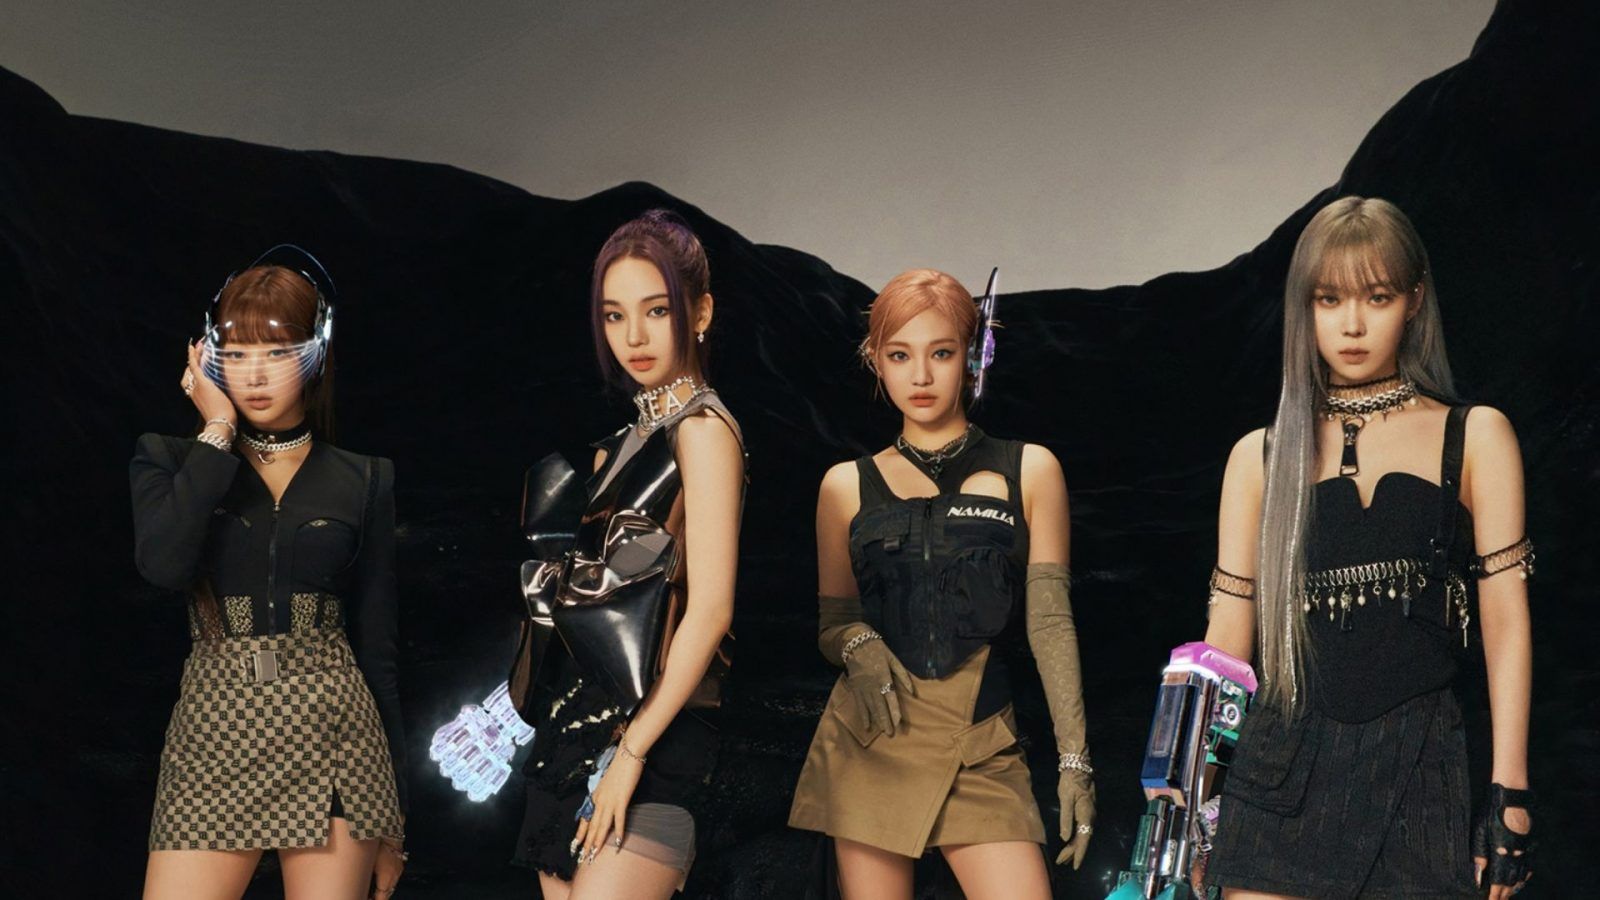 K-pop group aespa becomes fastest female band to hit No. 3 on Billboard 200